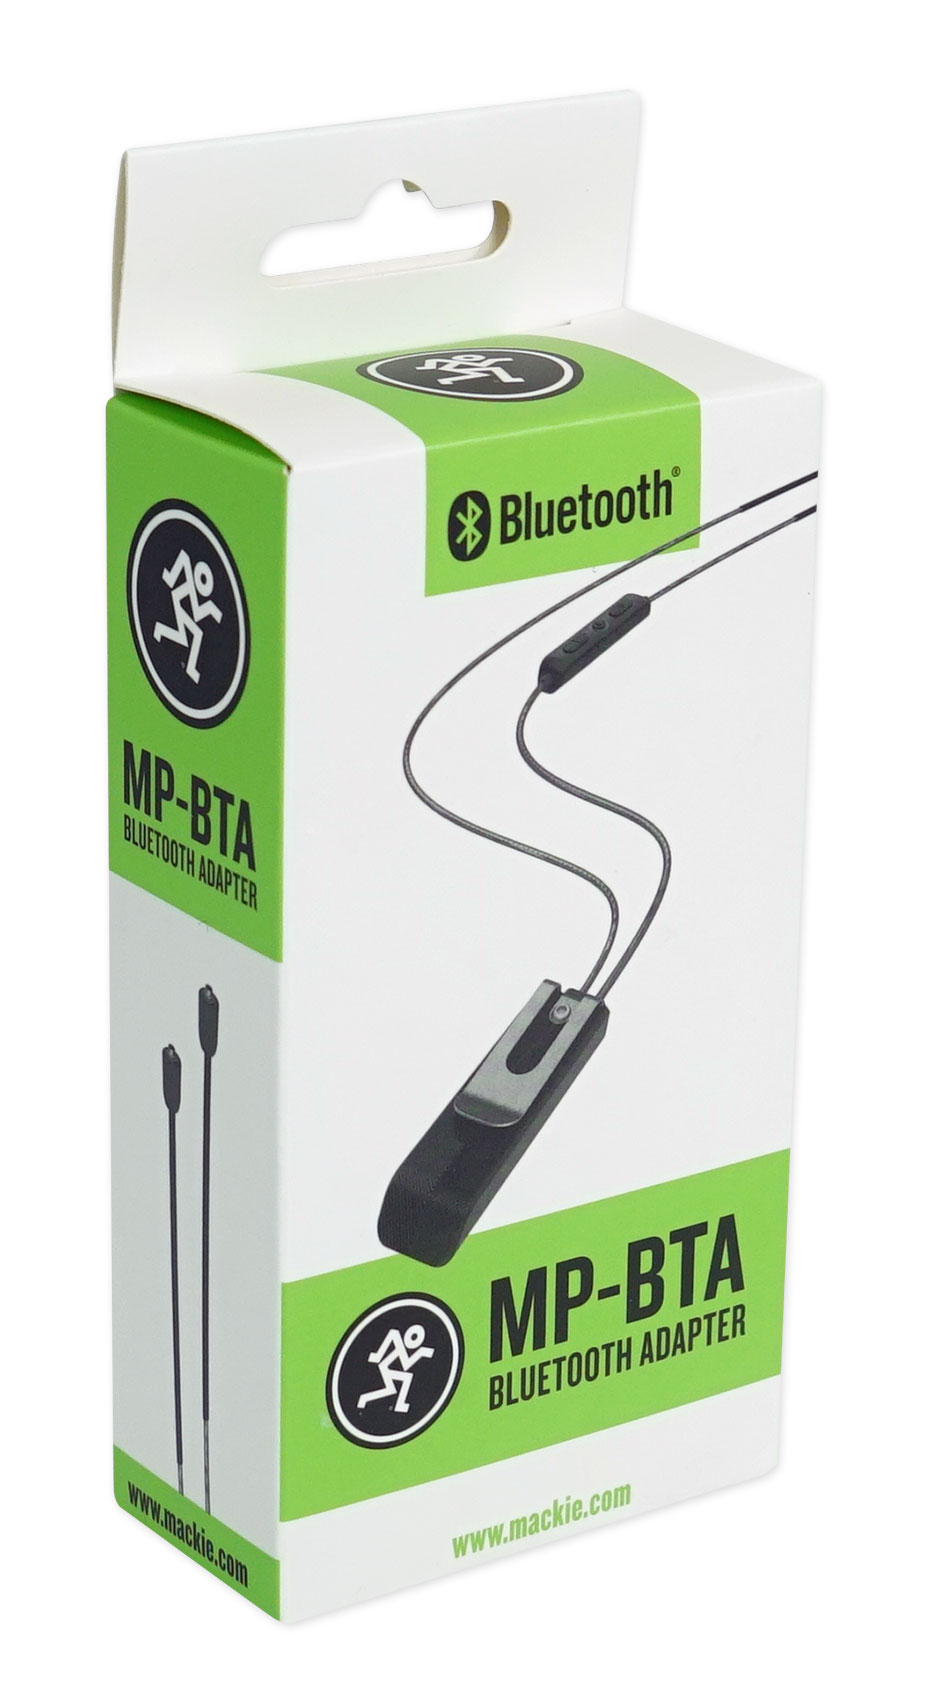 Mackie MP-BTA Bluetooth Adapter with MMCX Connector for MP Series In-Ear Monitors - image 3 of 3